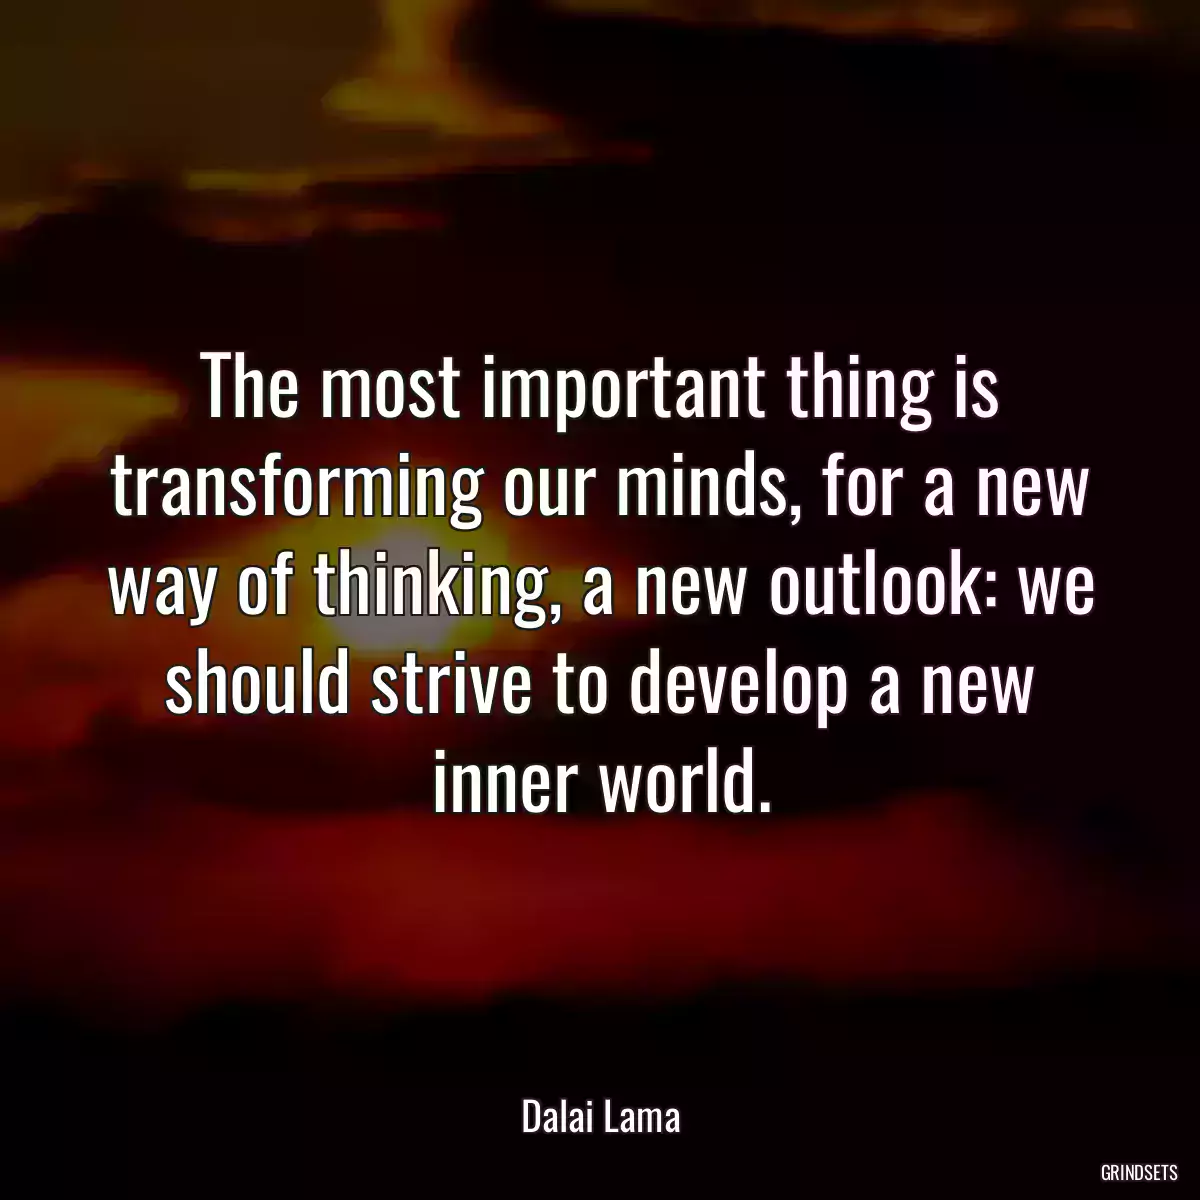 The most important thing is transforming our minds, for a new way of thinking, a new outlook: we should strive to develop a new inner world.